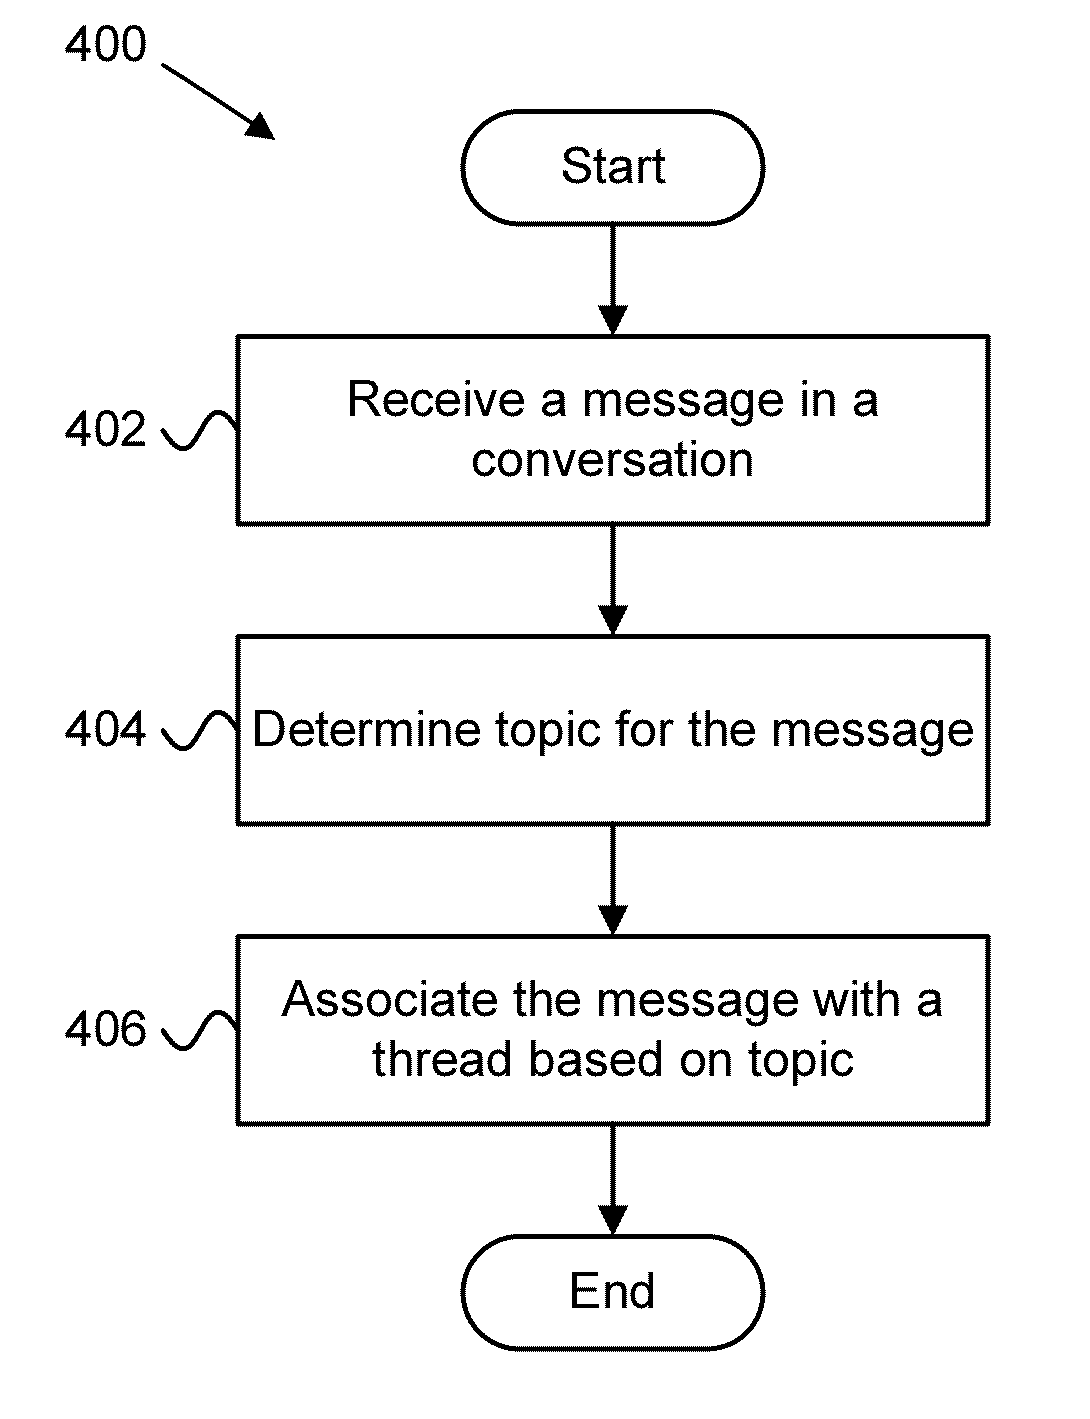 Context-aware aggregation of text-based messages